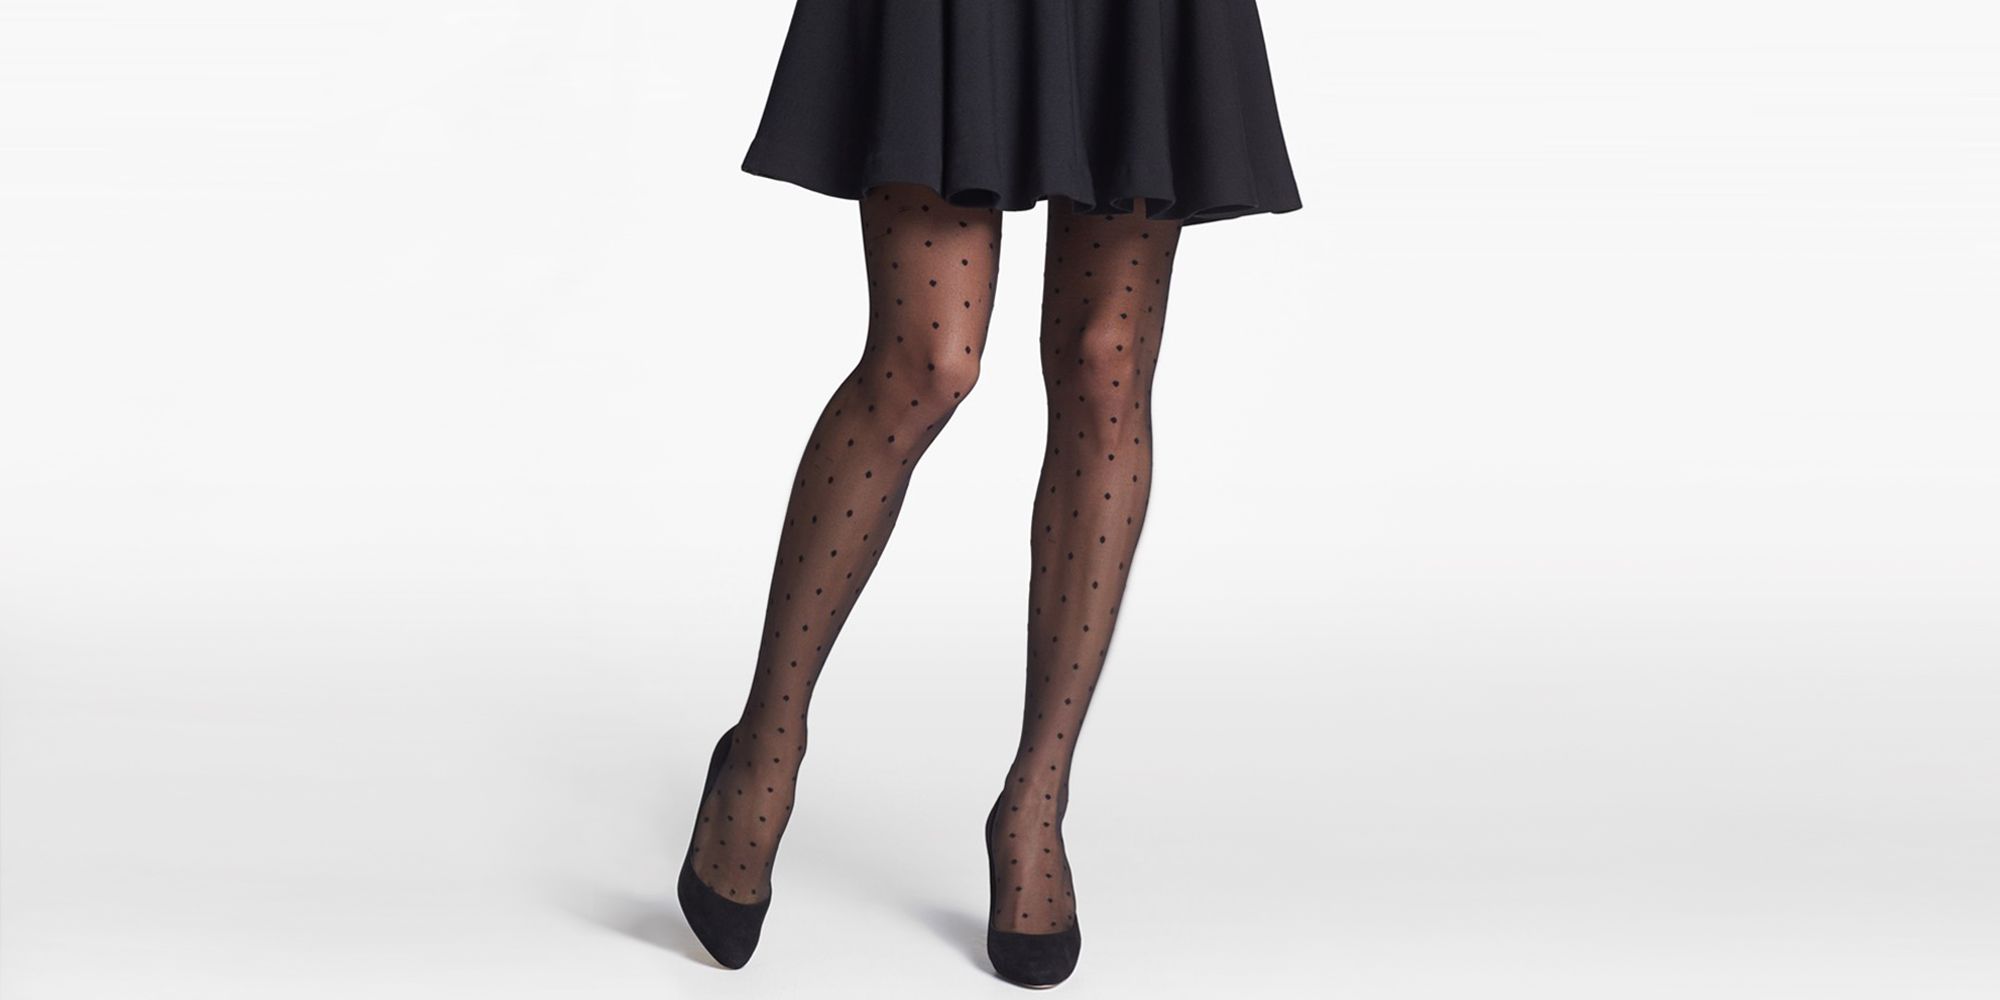 Patterned Tights, Best Pattern Tights, Tights For Women